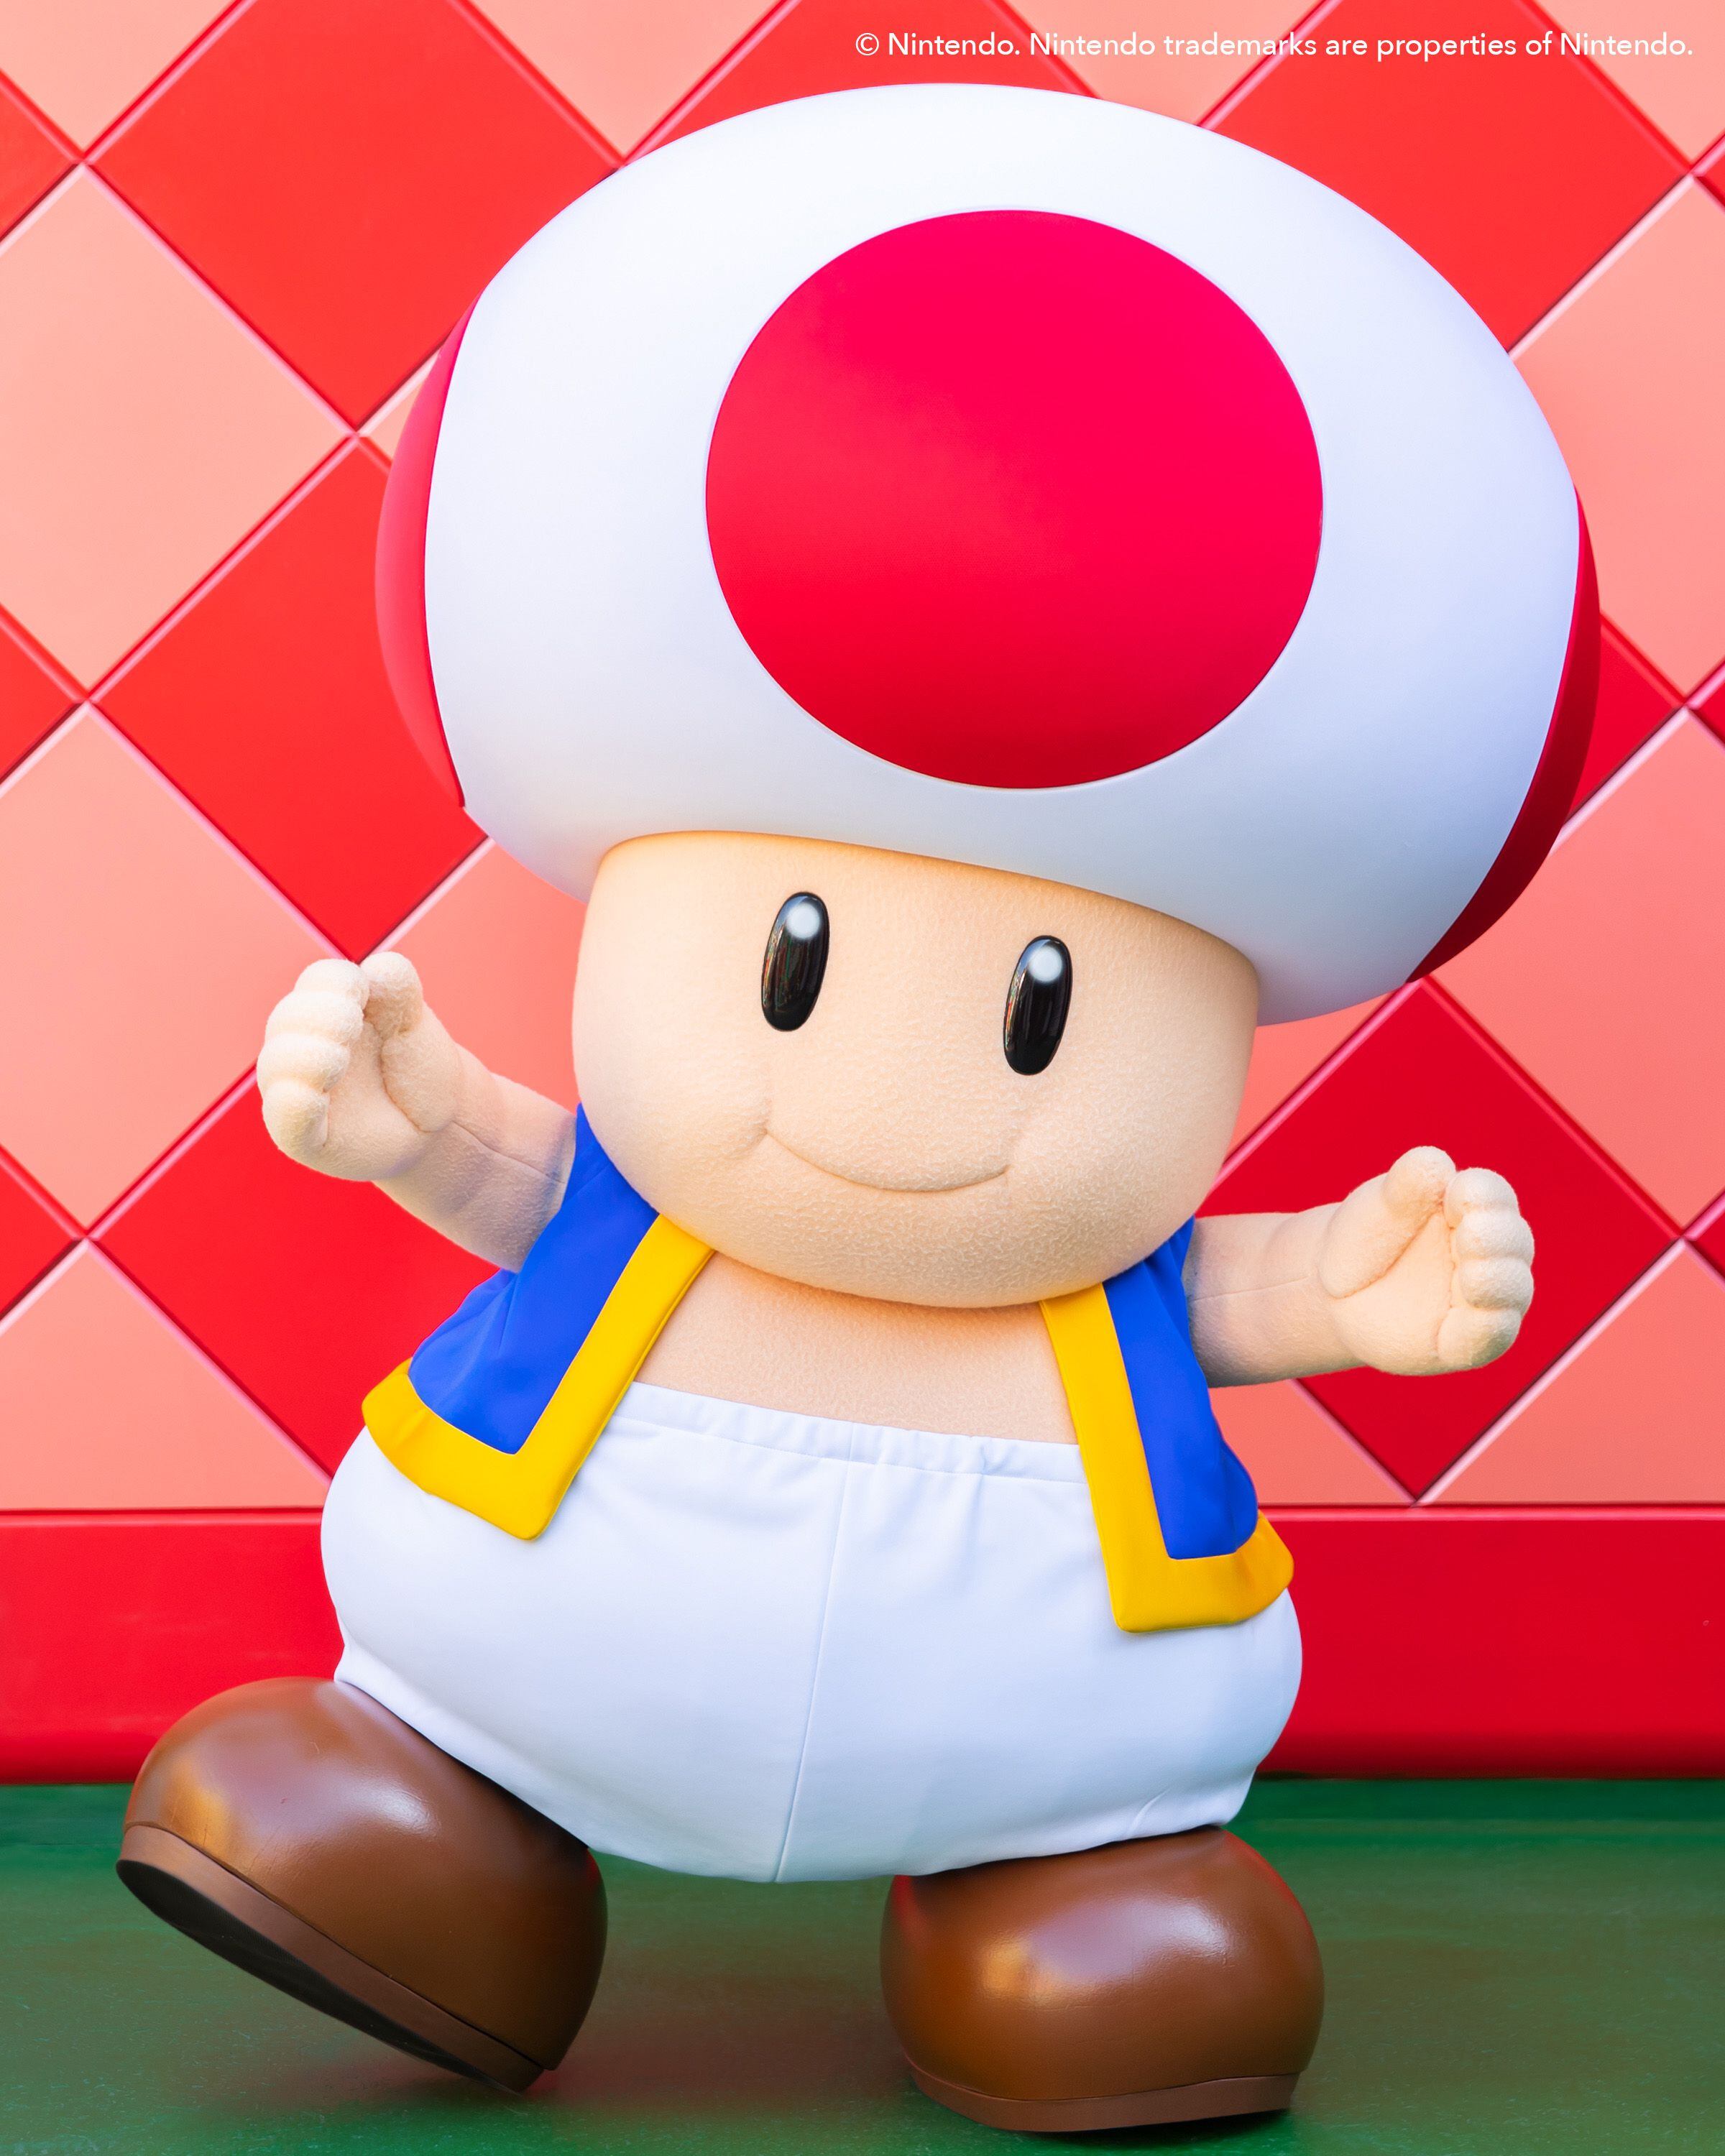 SUPER NINTENDO WORLD at Universal Studios Hollywood Welcomes Toad, A New Walk-About Character